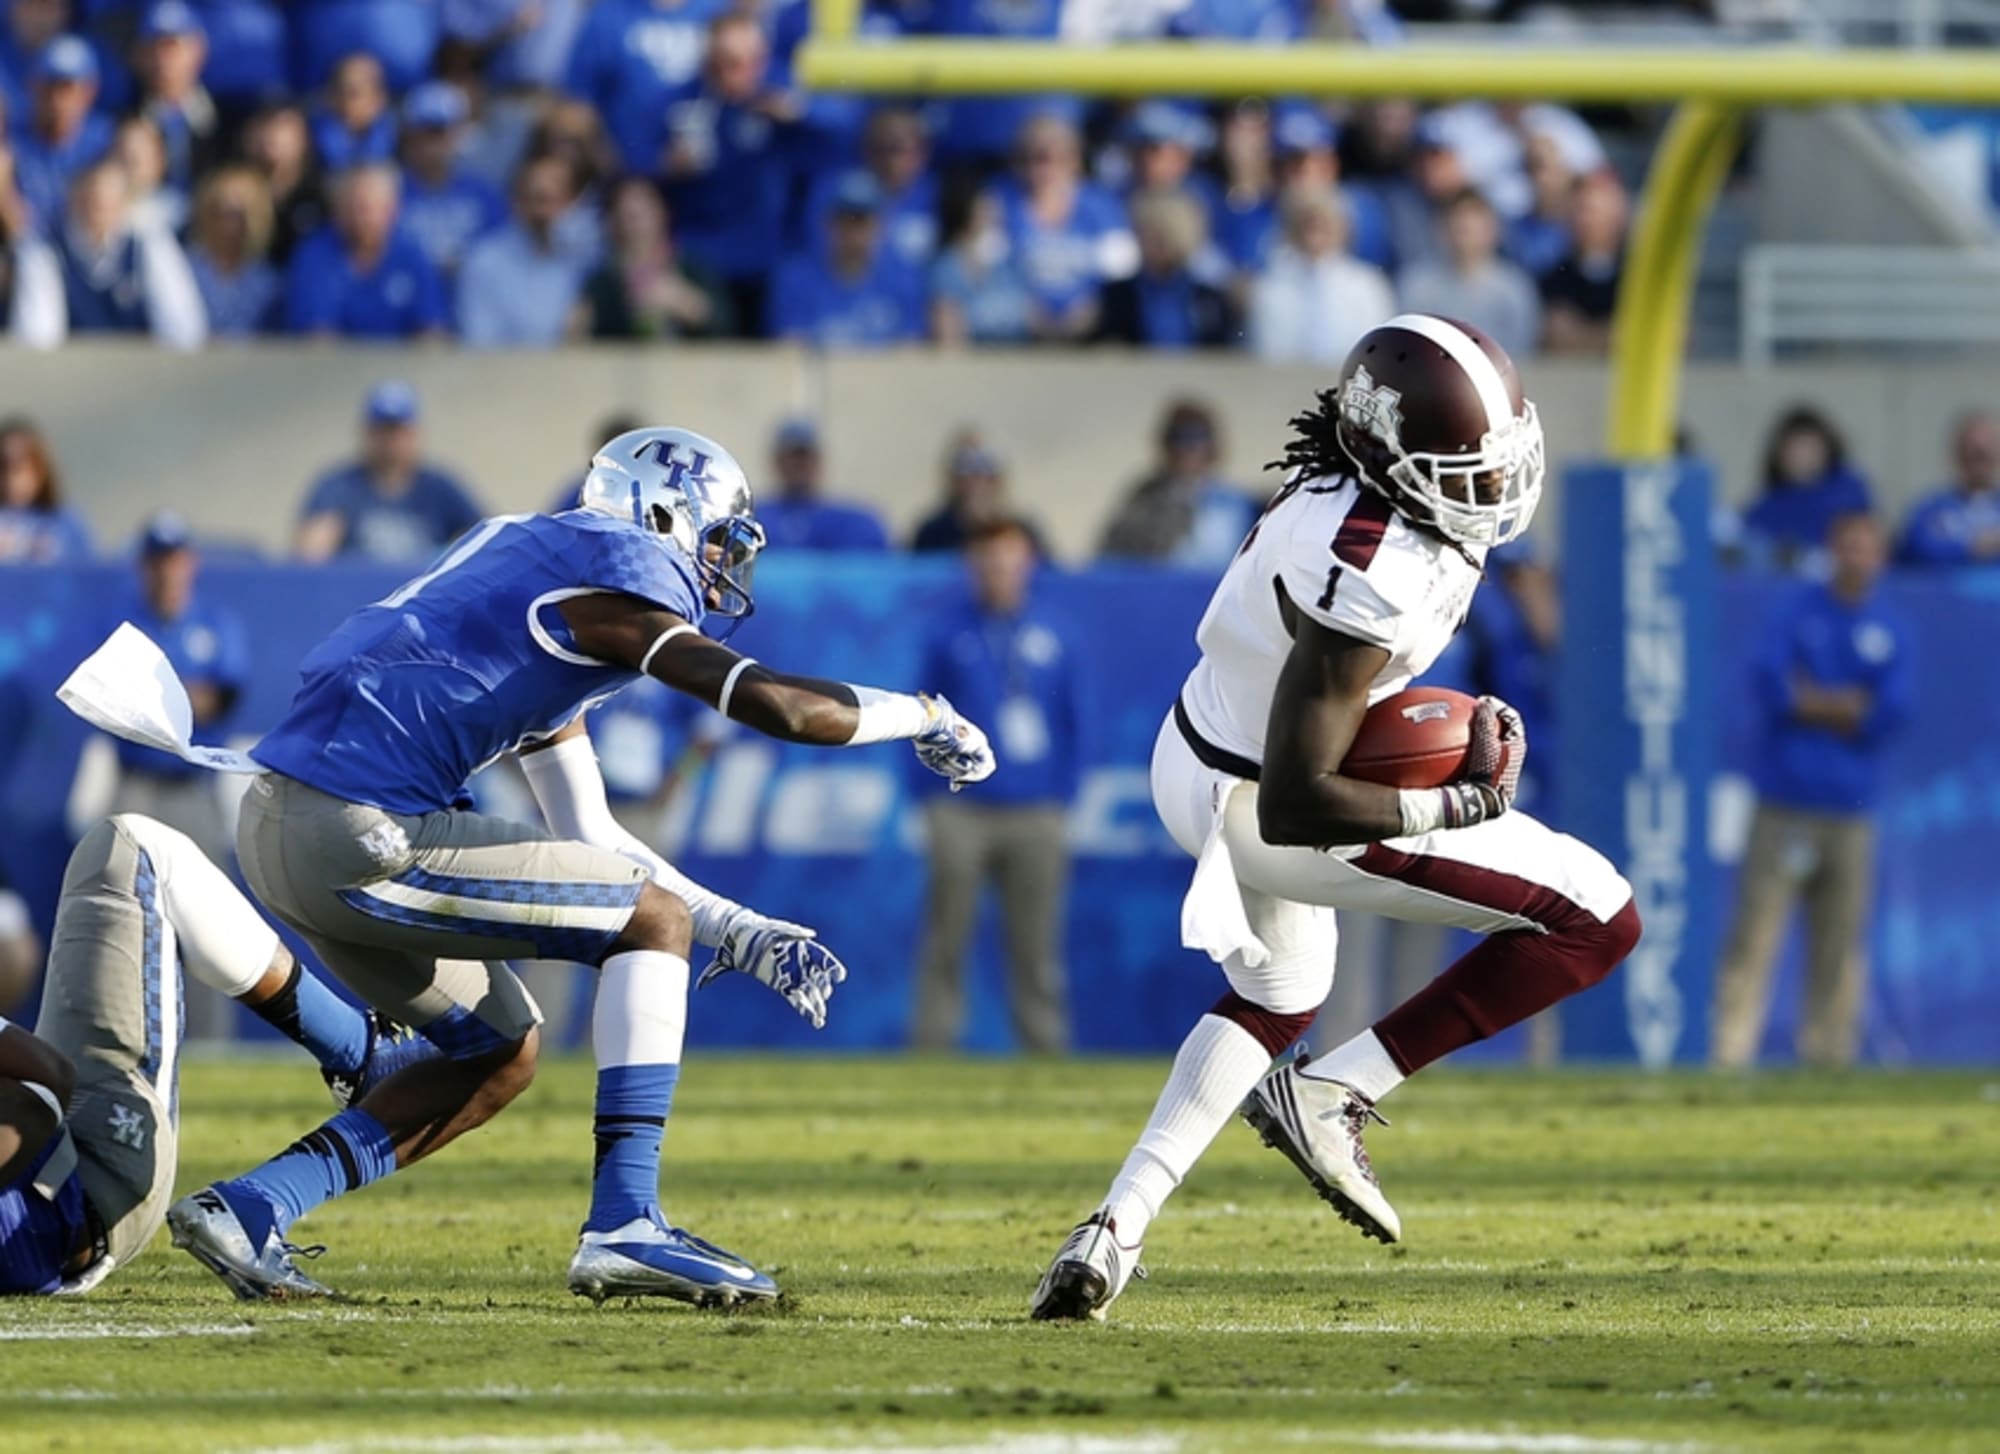 Mississippi State vs. Kentucky Rambling Preview